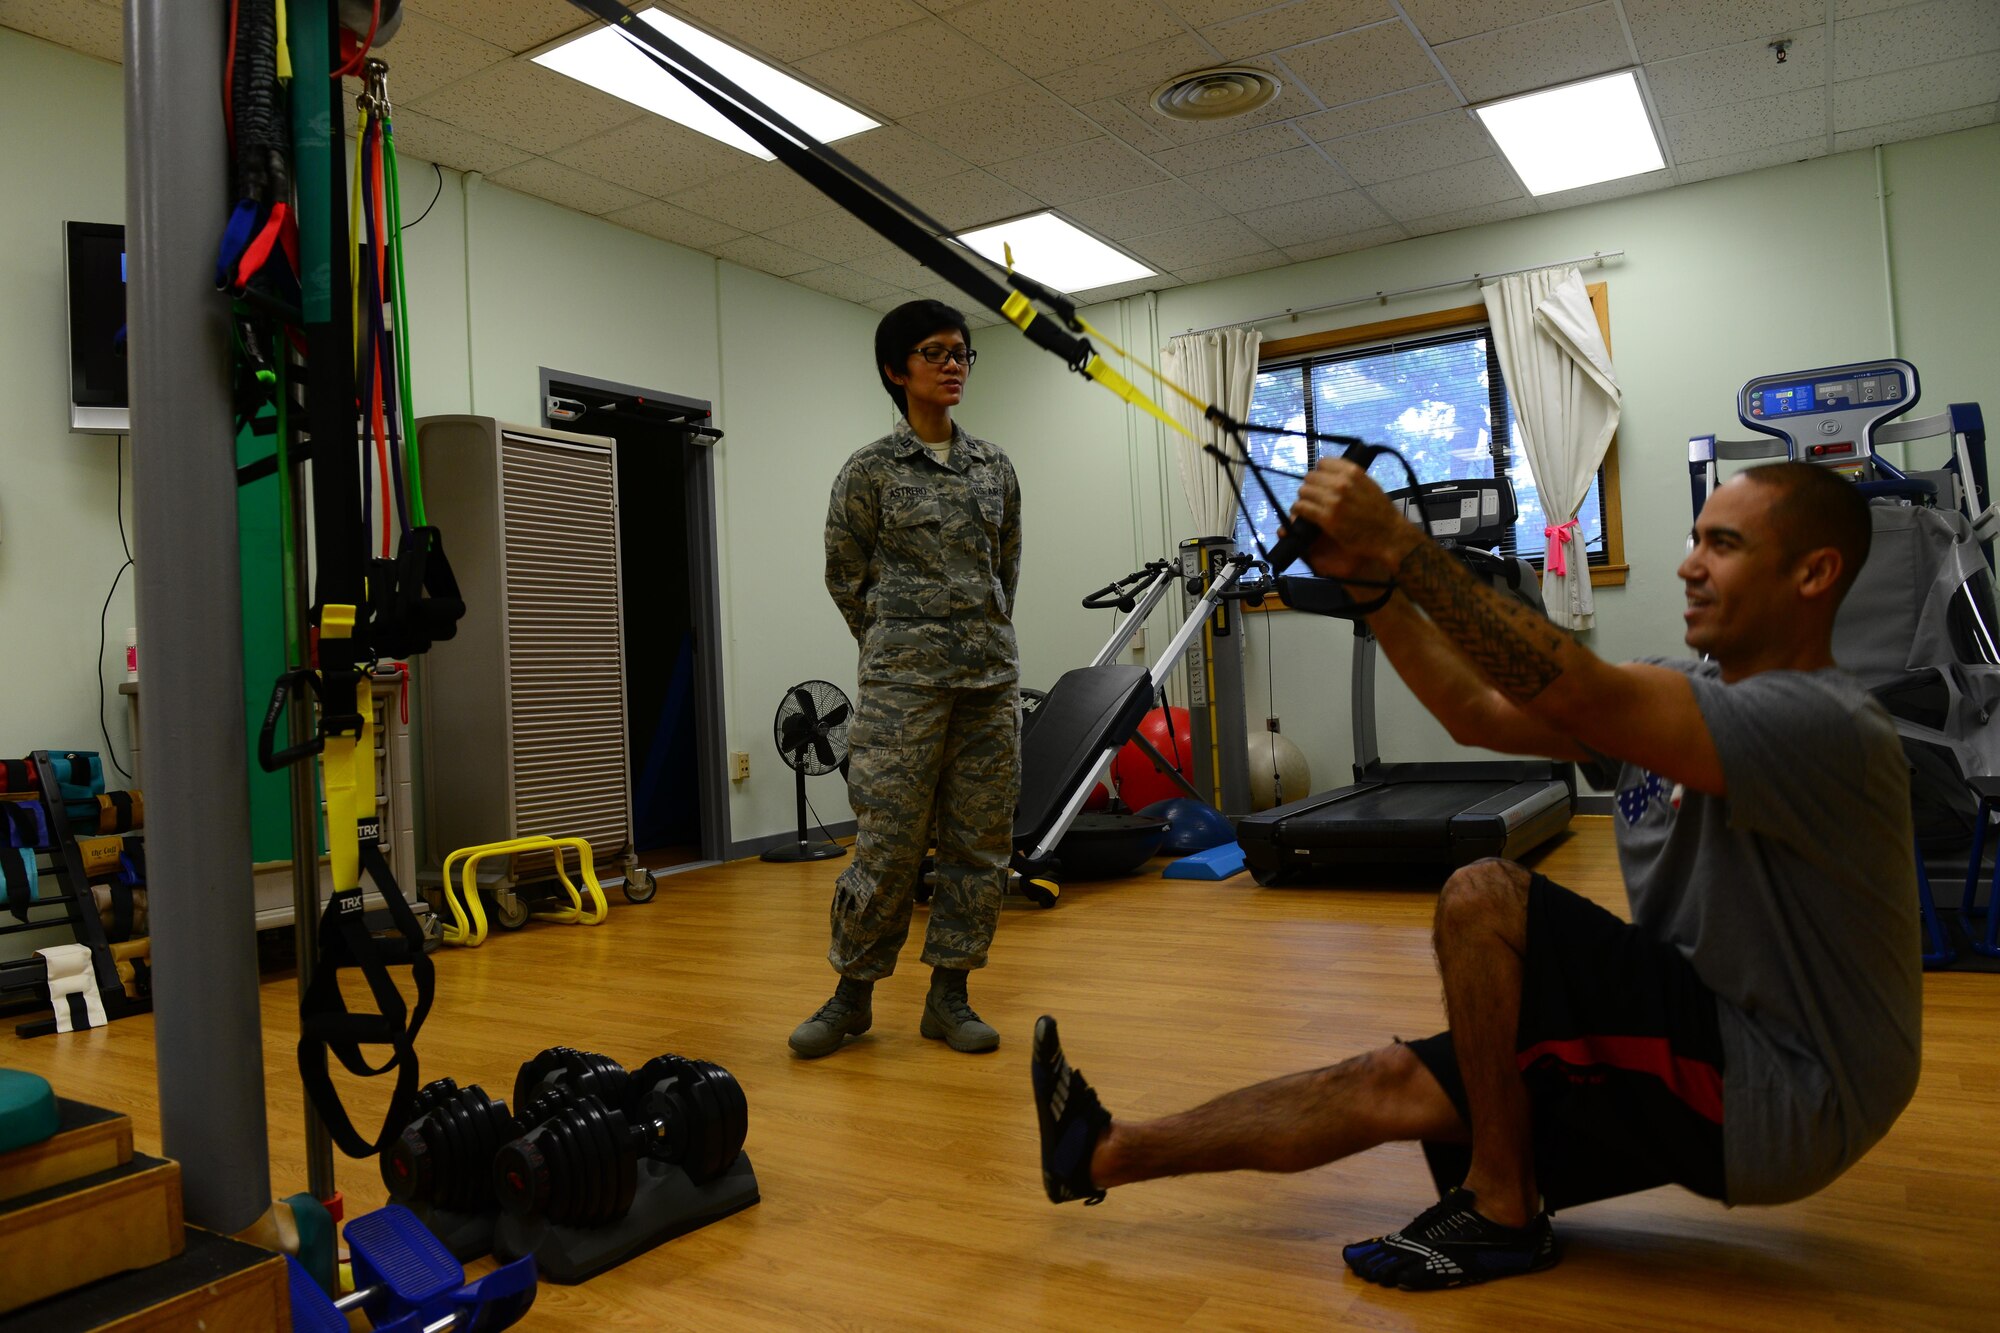 U.S. Air Force Capt.  Jacqueline Astrero, 8th Medical Operations Squadron health promotion flight commander and physical therapist, coaches Tech. Sgt. Anthony Flores, 8th MDOS physical therapy technician during therapy session at Kunsan Air Base, Republic of Korea, Jan. 7, 2016. A physical therapy technician's job is to assist the commander and return active duty members to full duty status, making them fit to fight. (U.S. Air Force photo by Senior Airman Ashley L. Gardner/Released)
